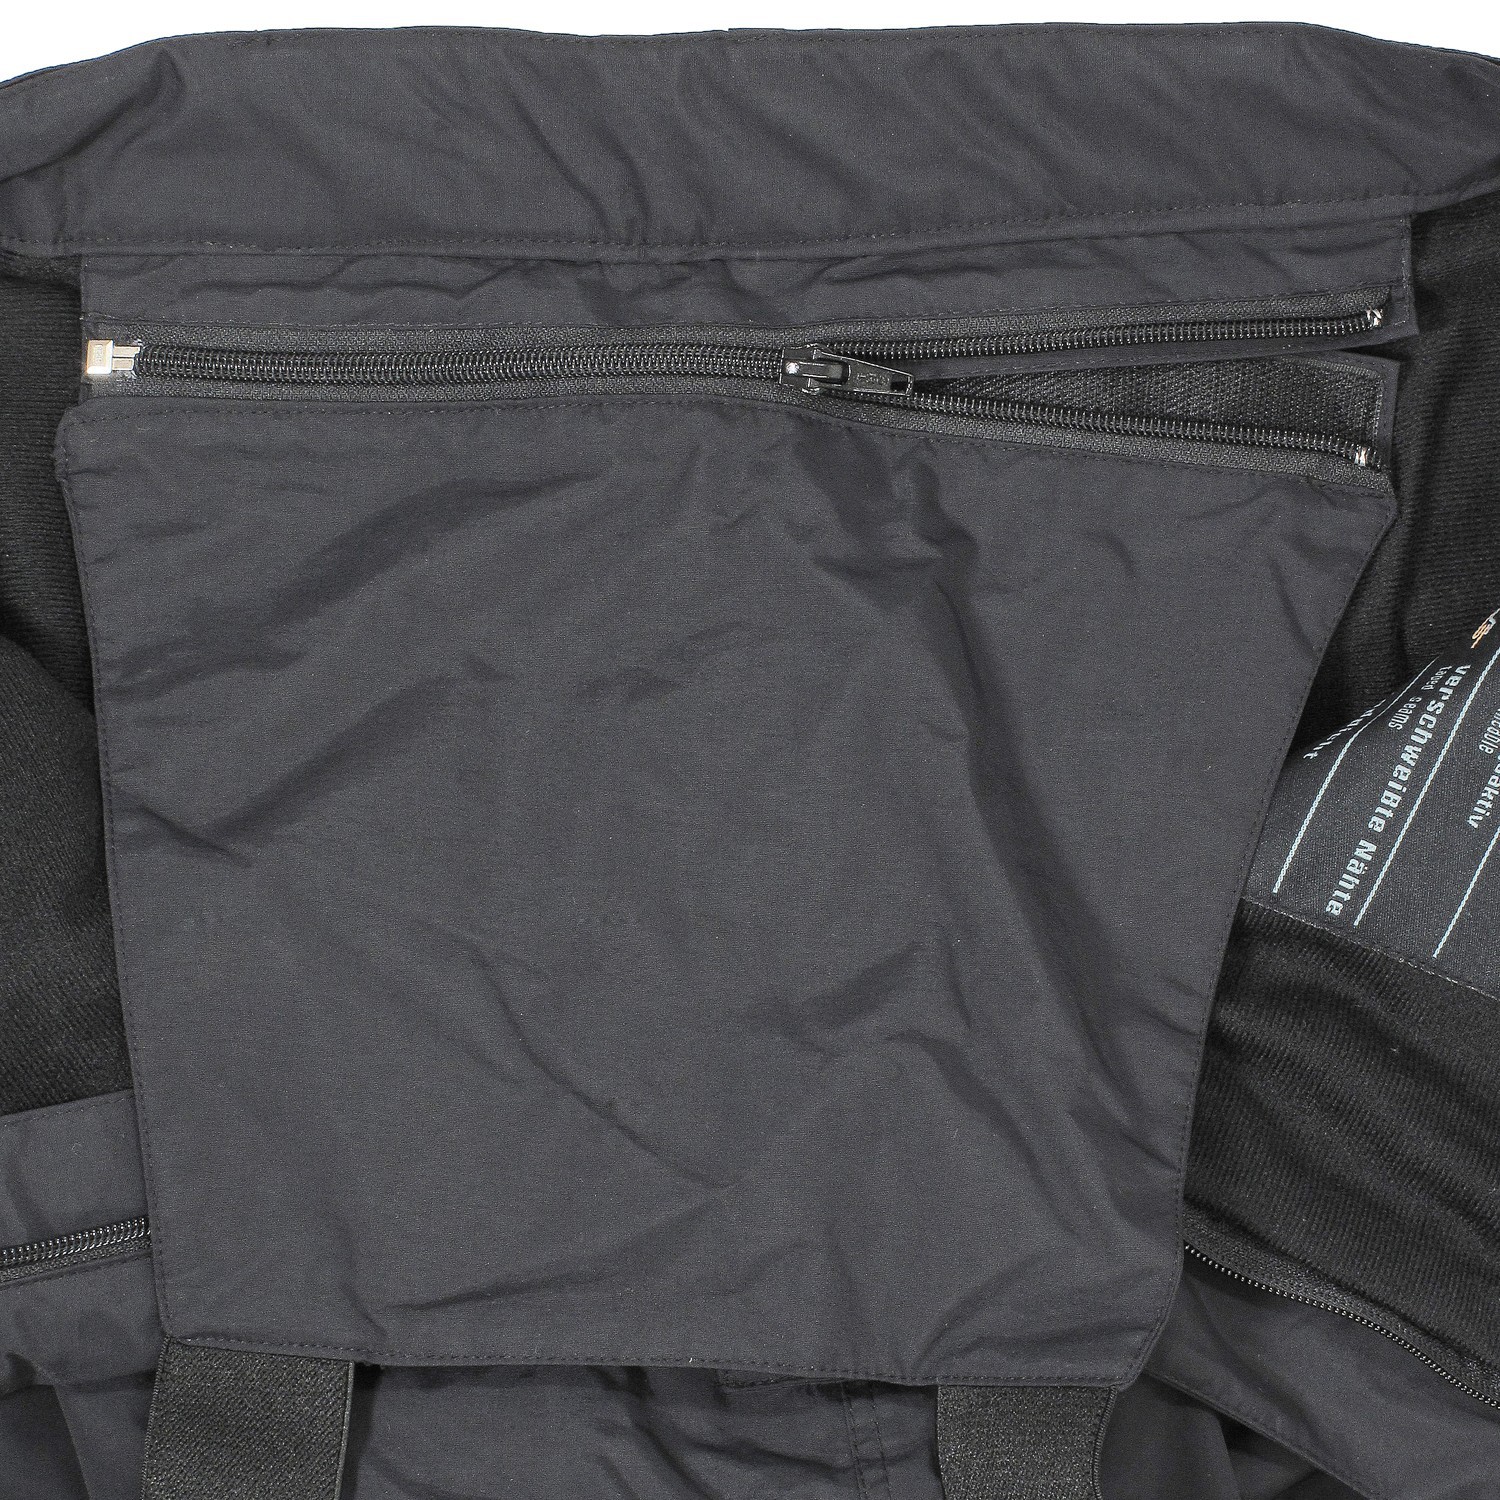 Ski pants in black with a pair of removeable braces by marc&mark in extra large sizes up to 14XL